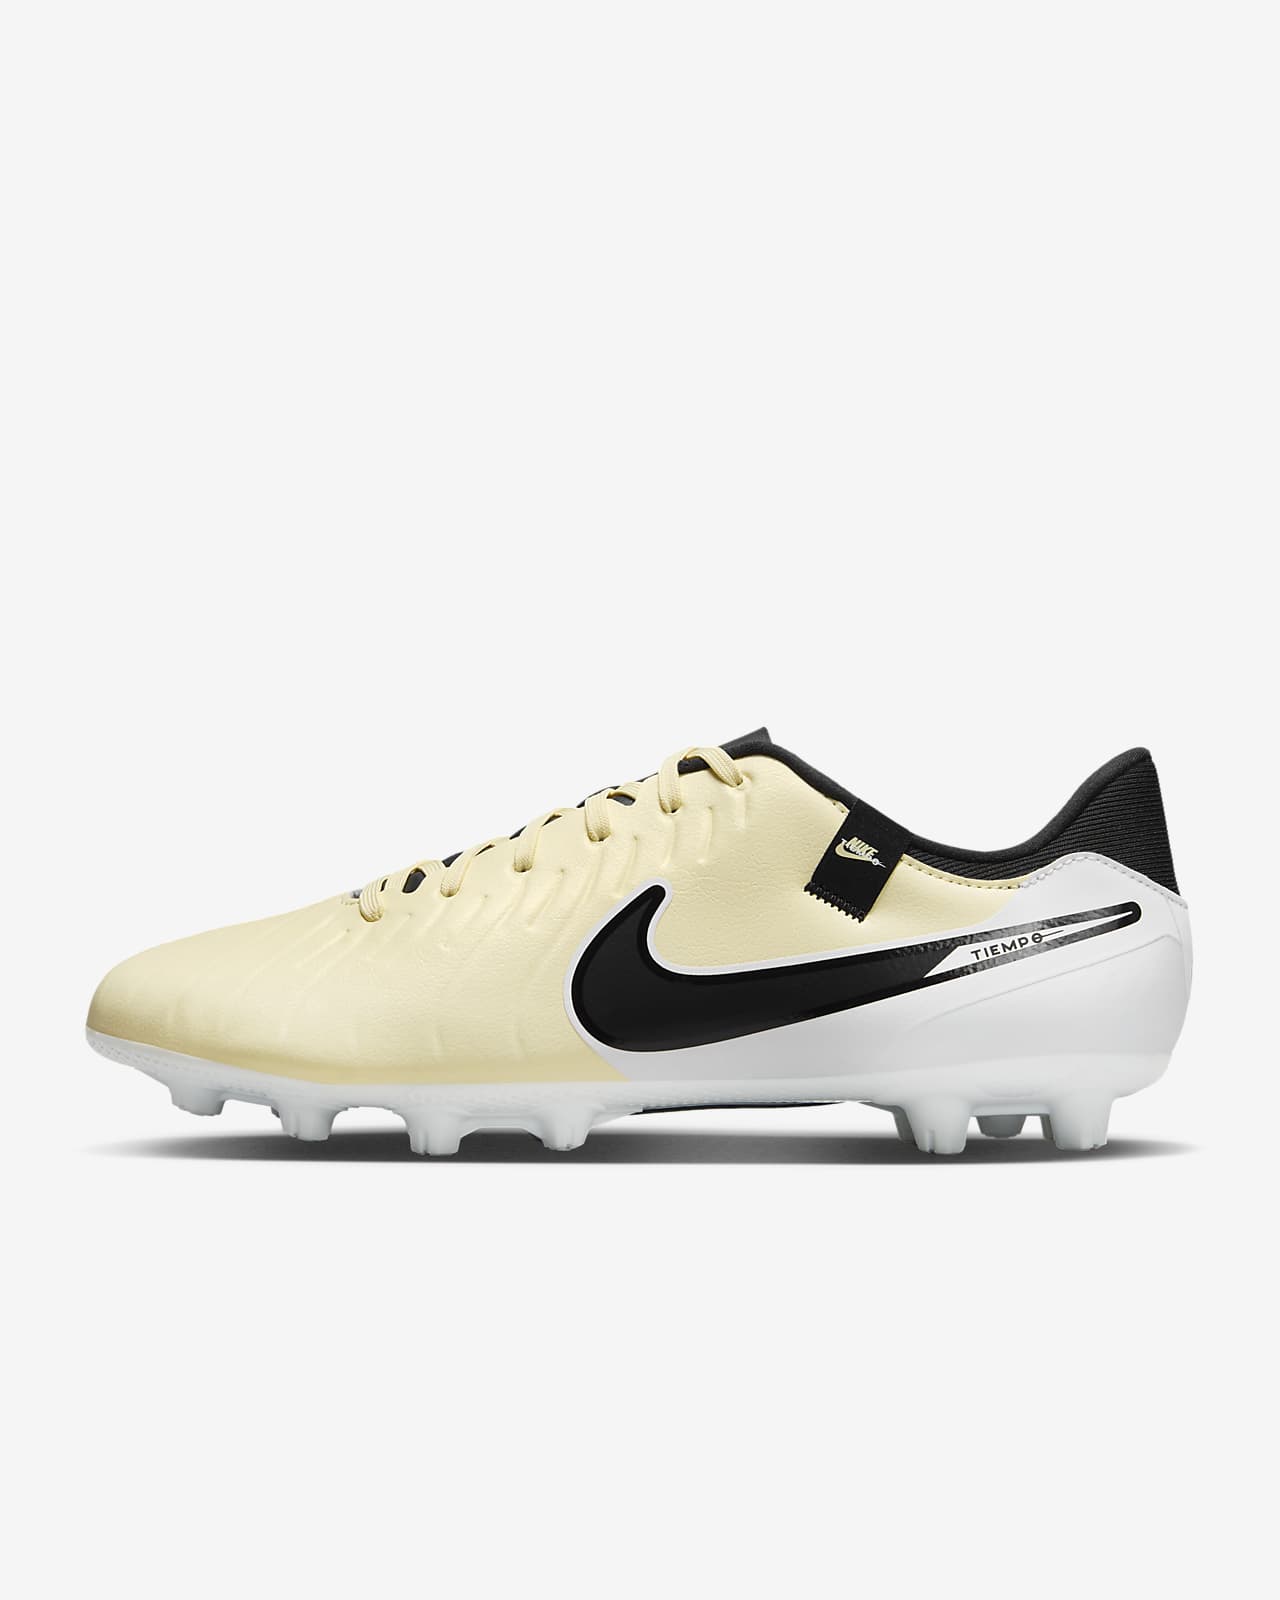 Nike Tiempo Legend 10 Academy Hard-Ground Low-Top Soccer Cleats